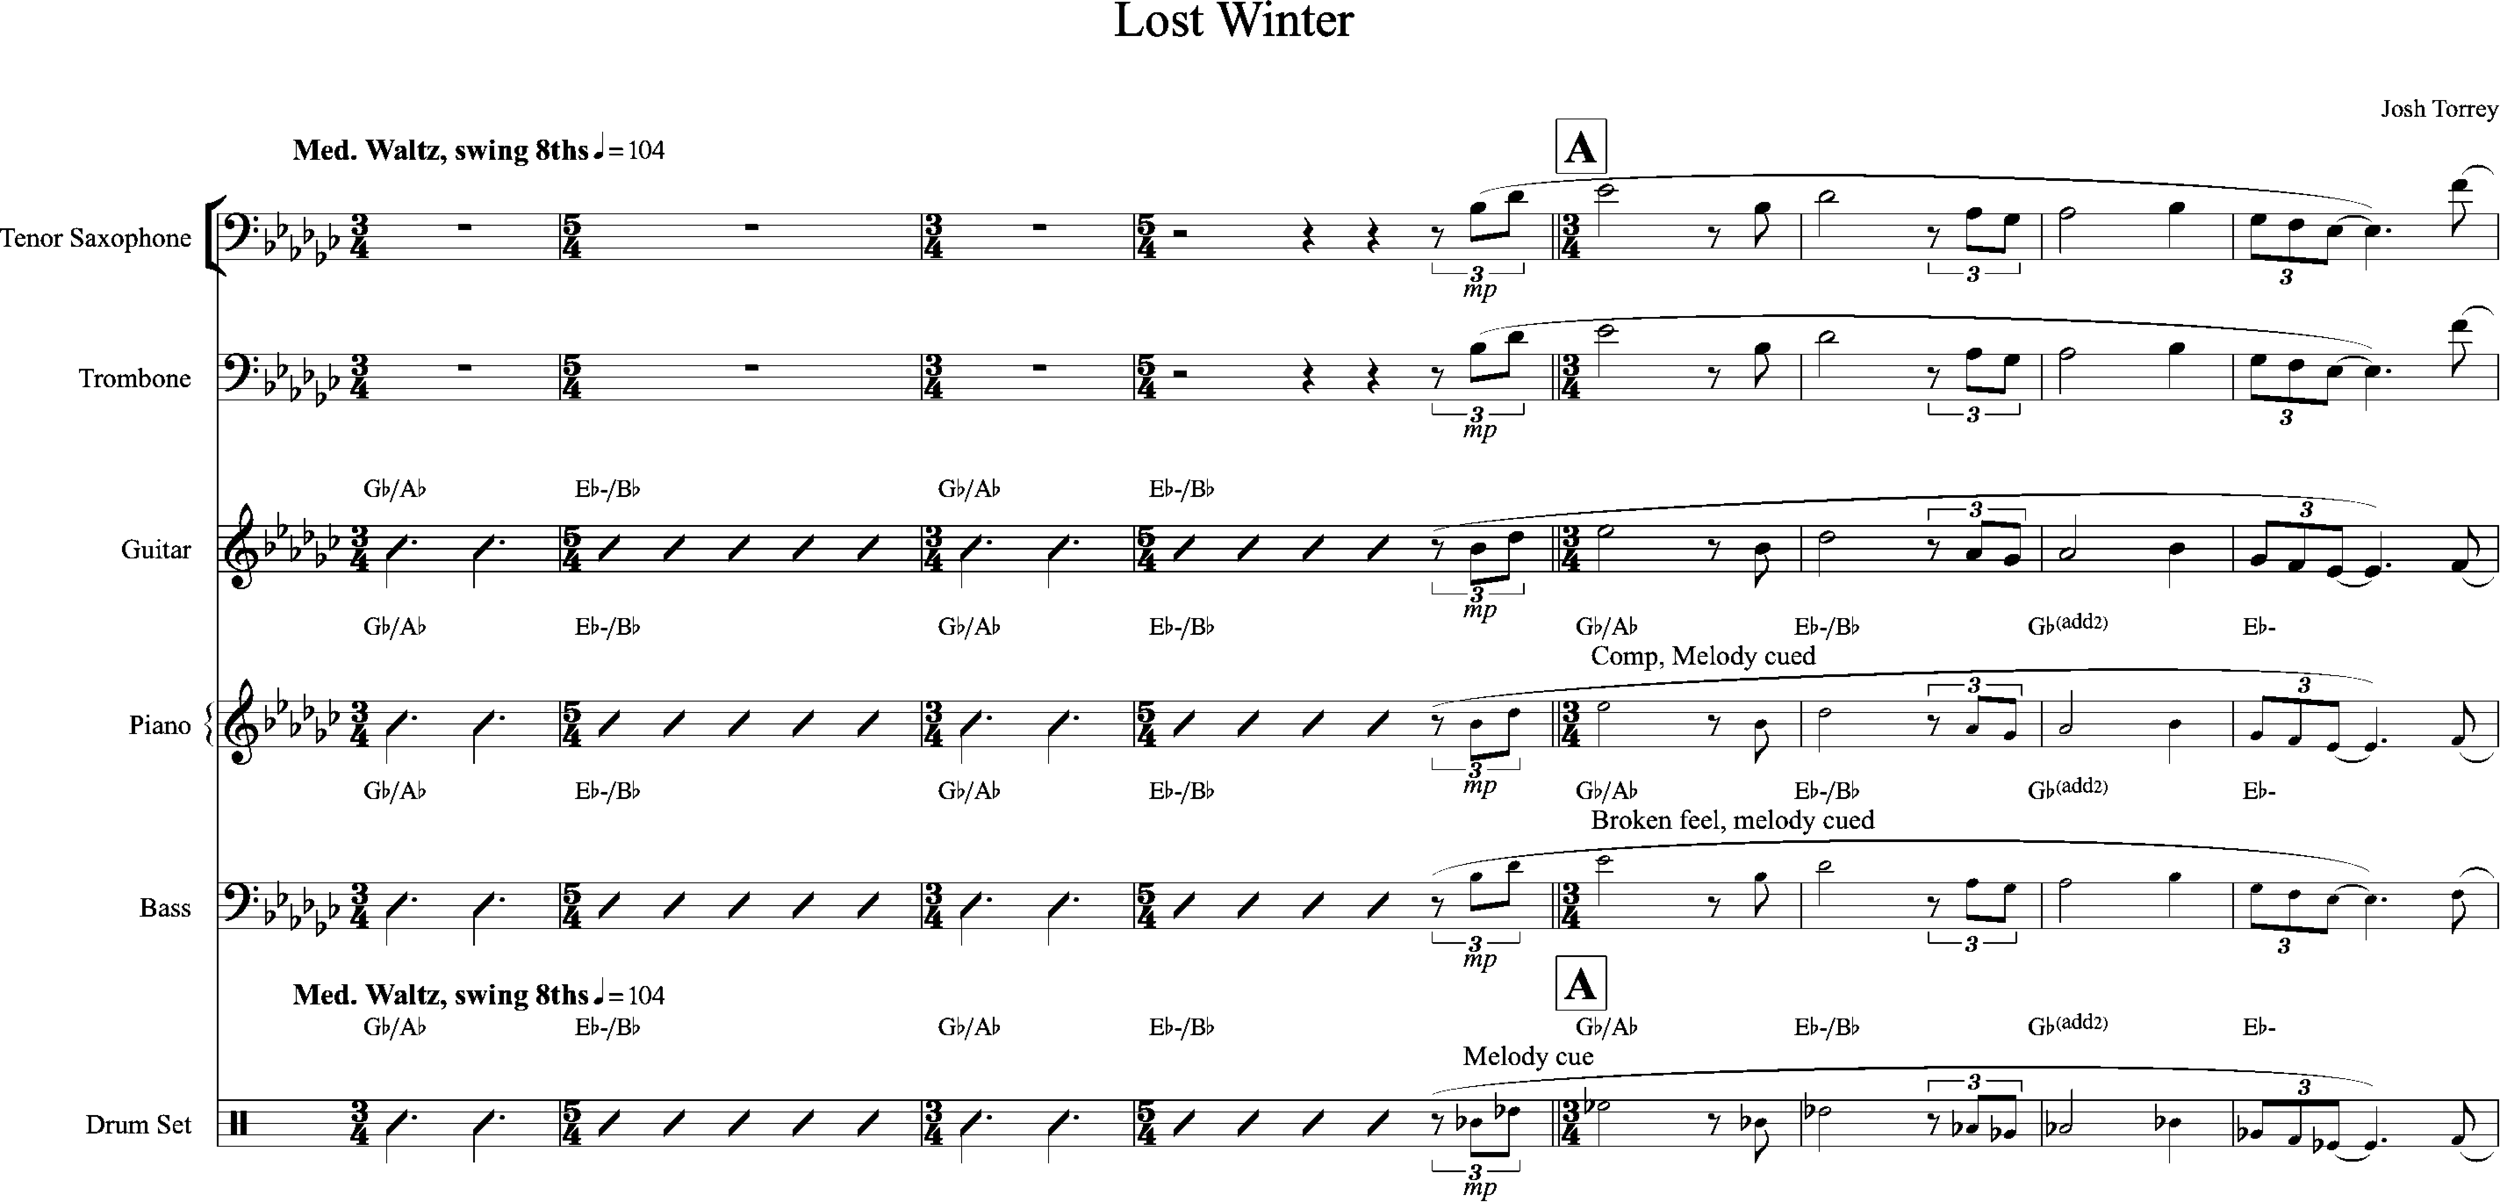 Lost Winter nonet printable_0001.png